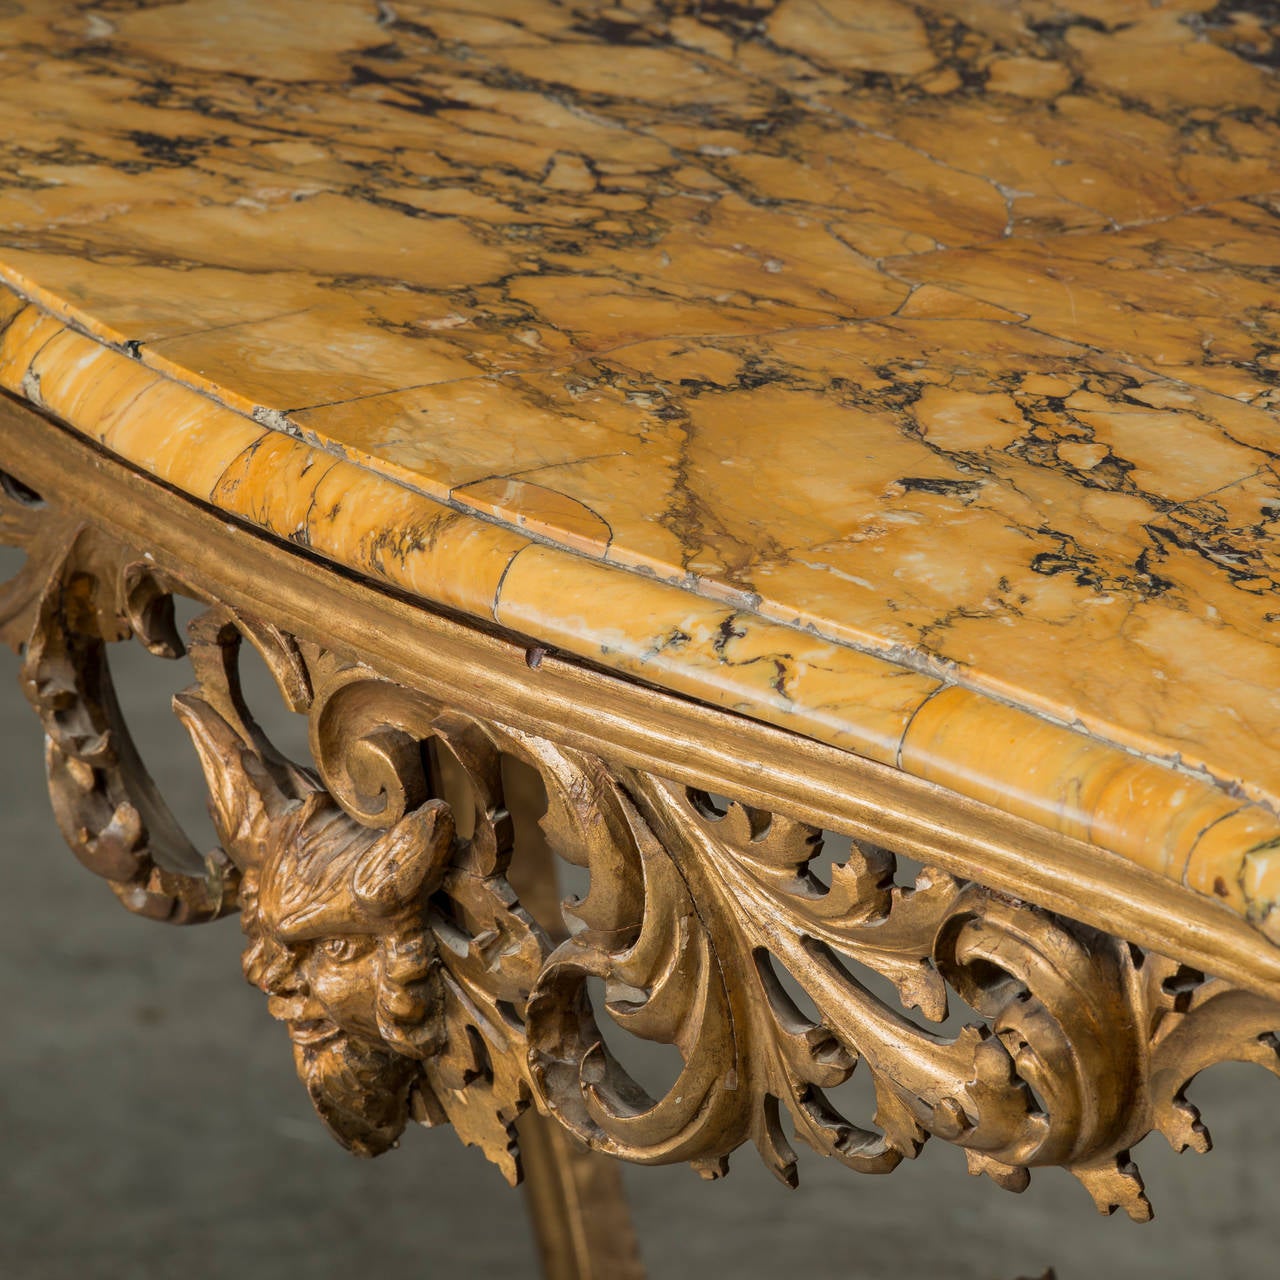 Italian console, wood carved and gilded, legs with a stretcher base with Putti in the middle. Exciting and decorative plate of 